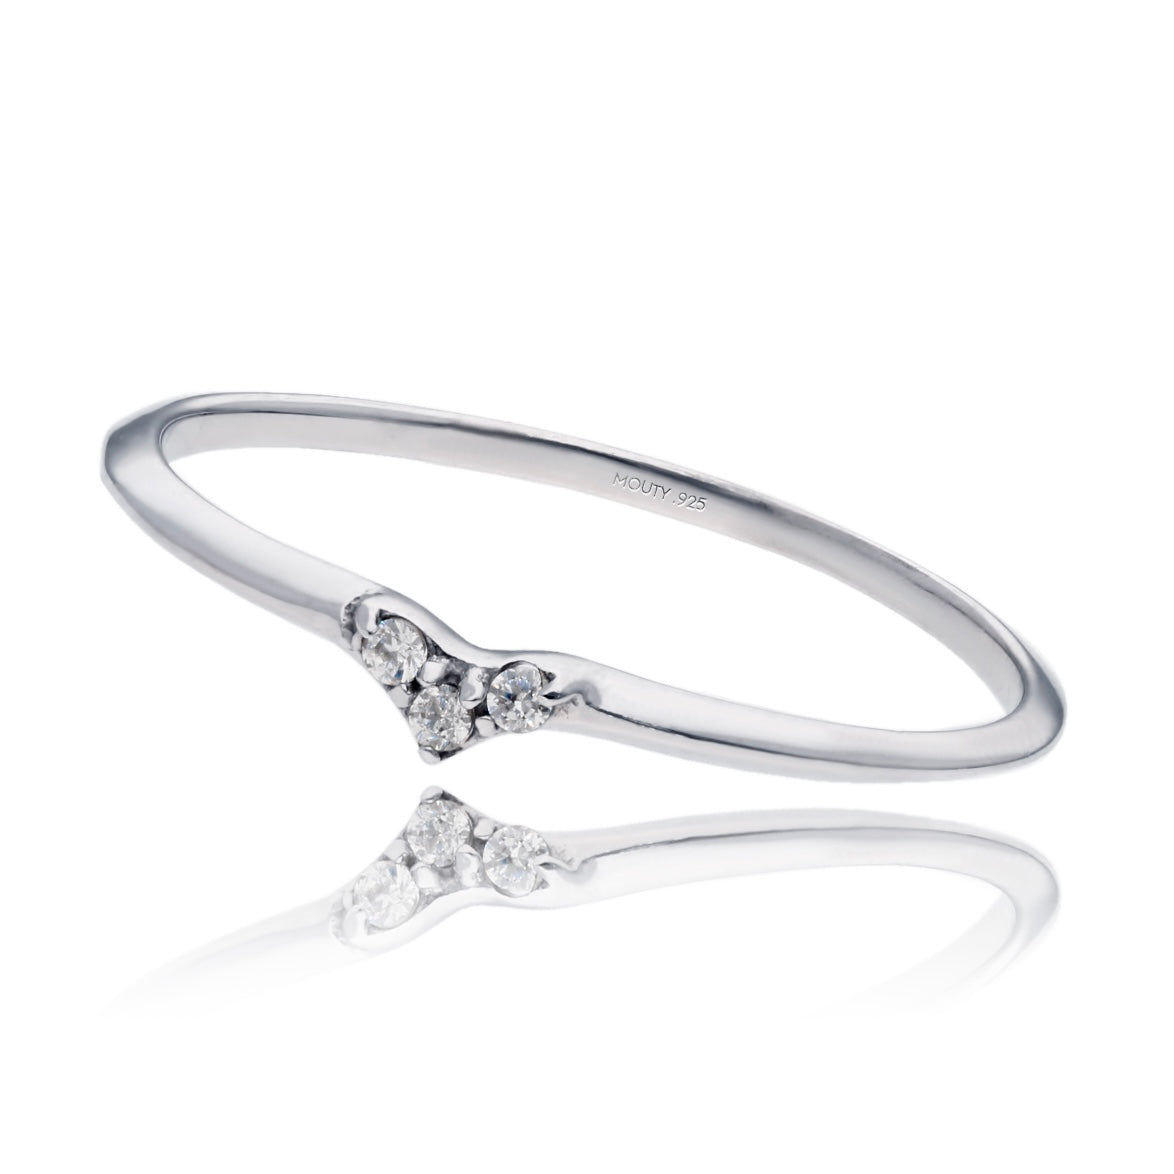 Angeline Ring in Silver with Zirconia